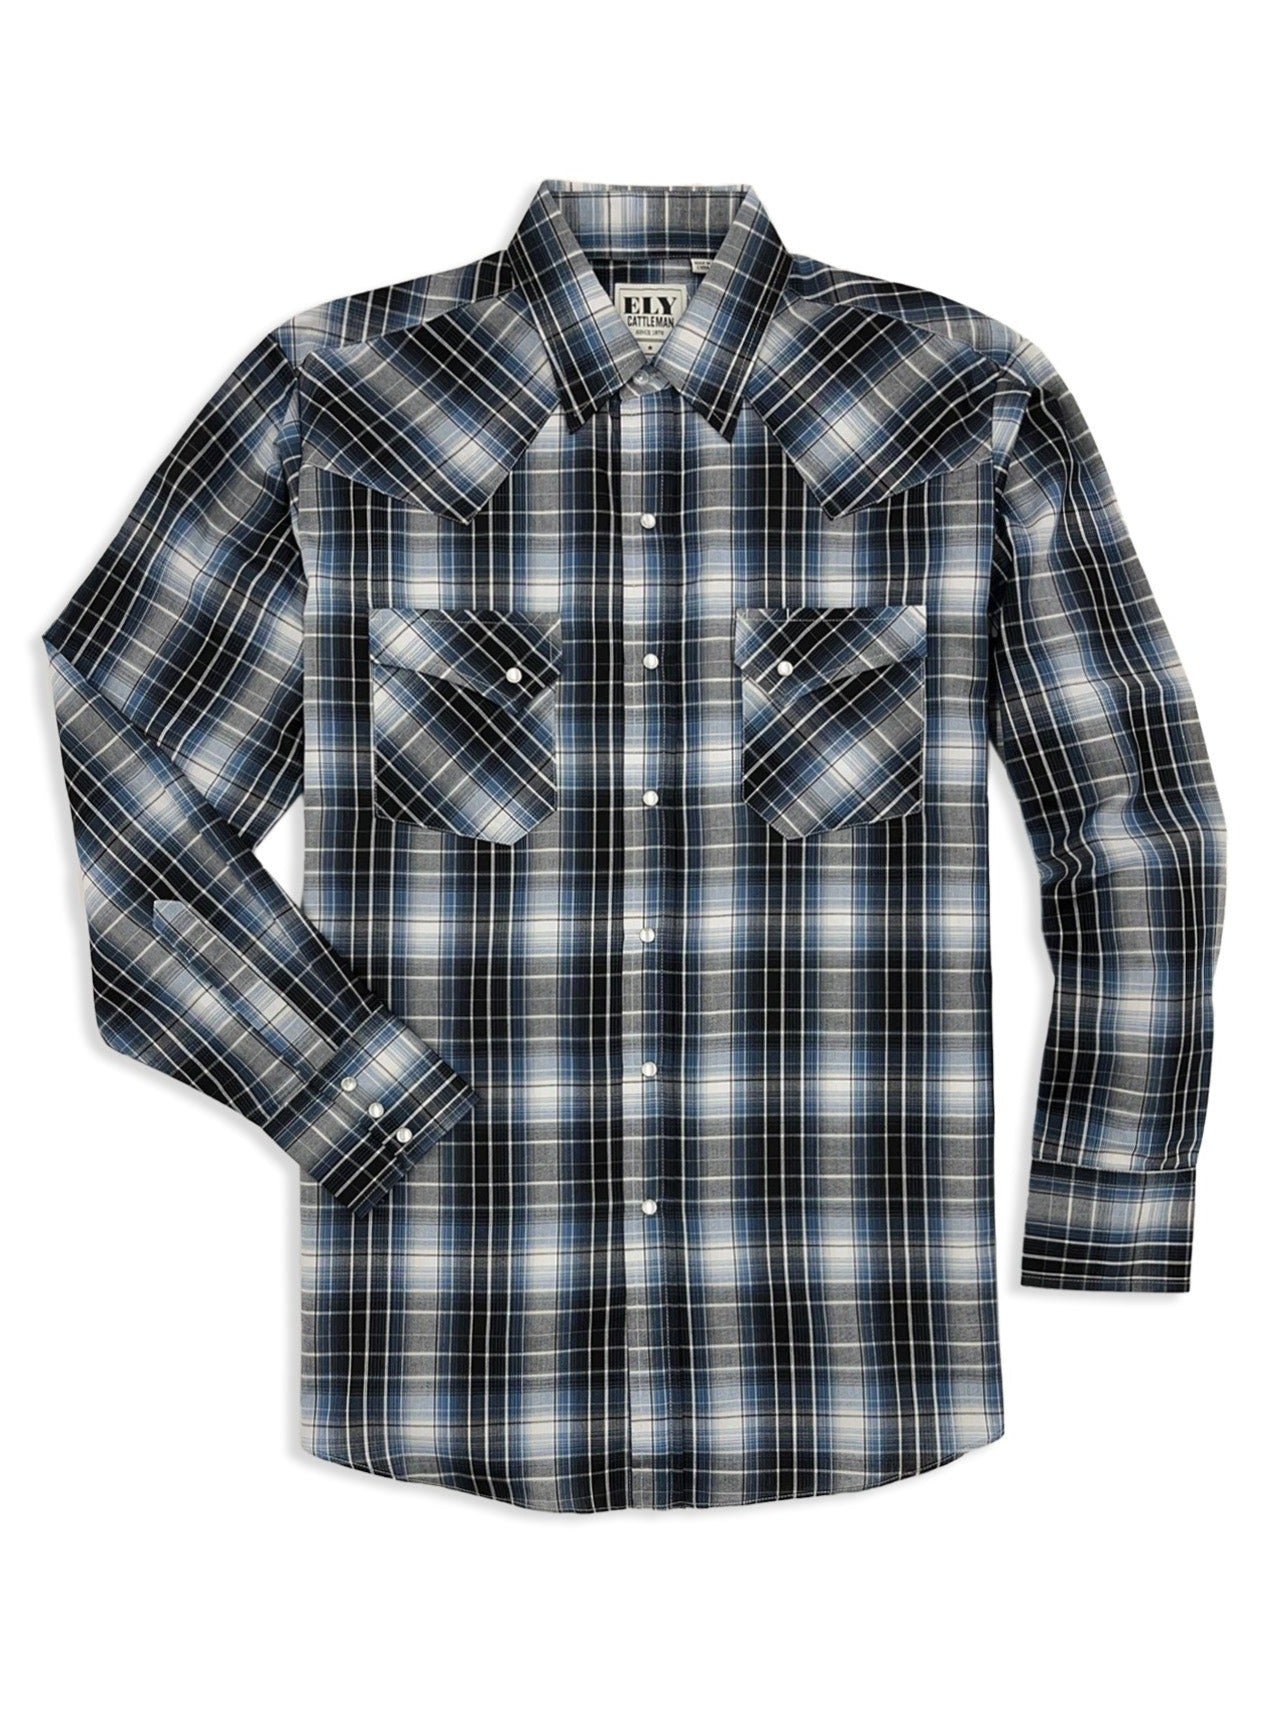 Ely Cattleman Men's Contrasting Piped Yoke Western Shirt - 15202980-89, Size: Small, Black